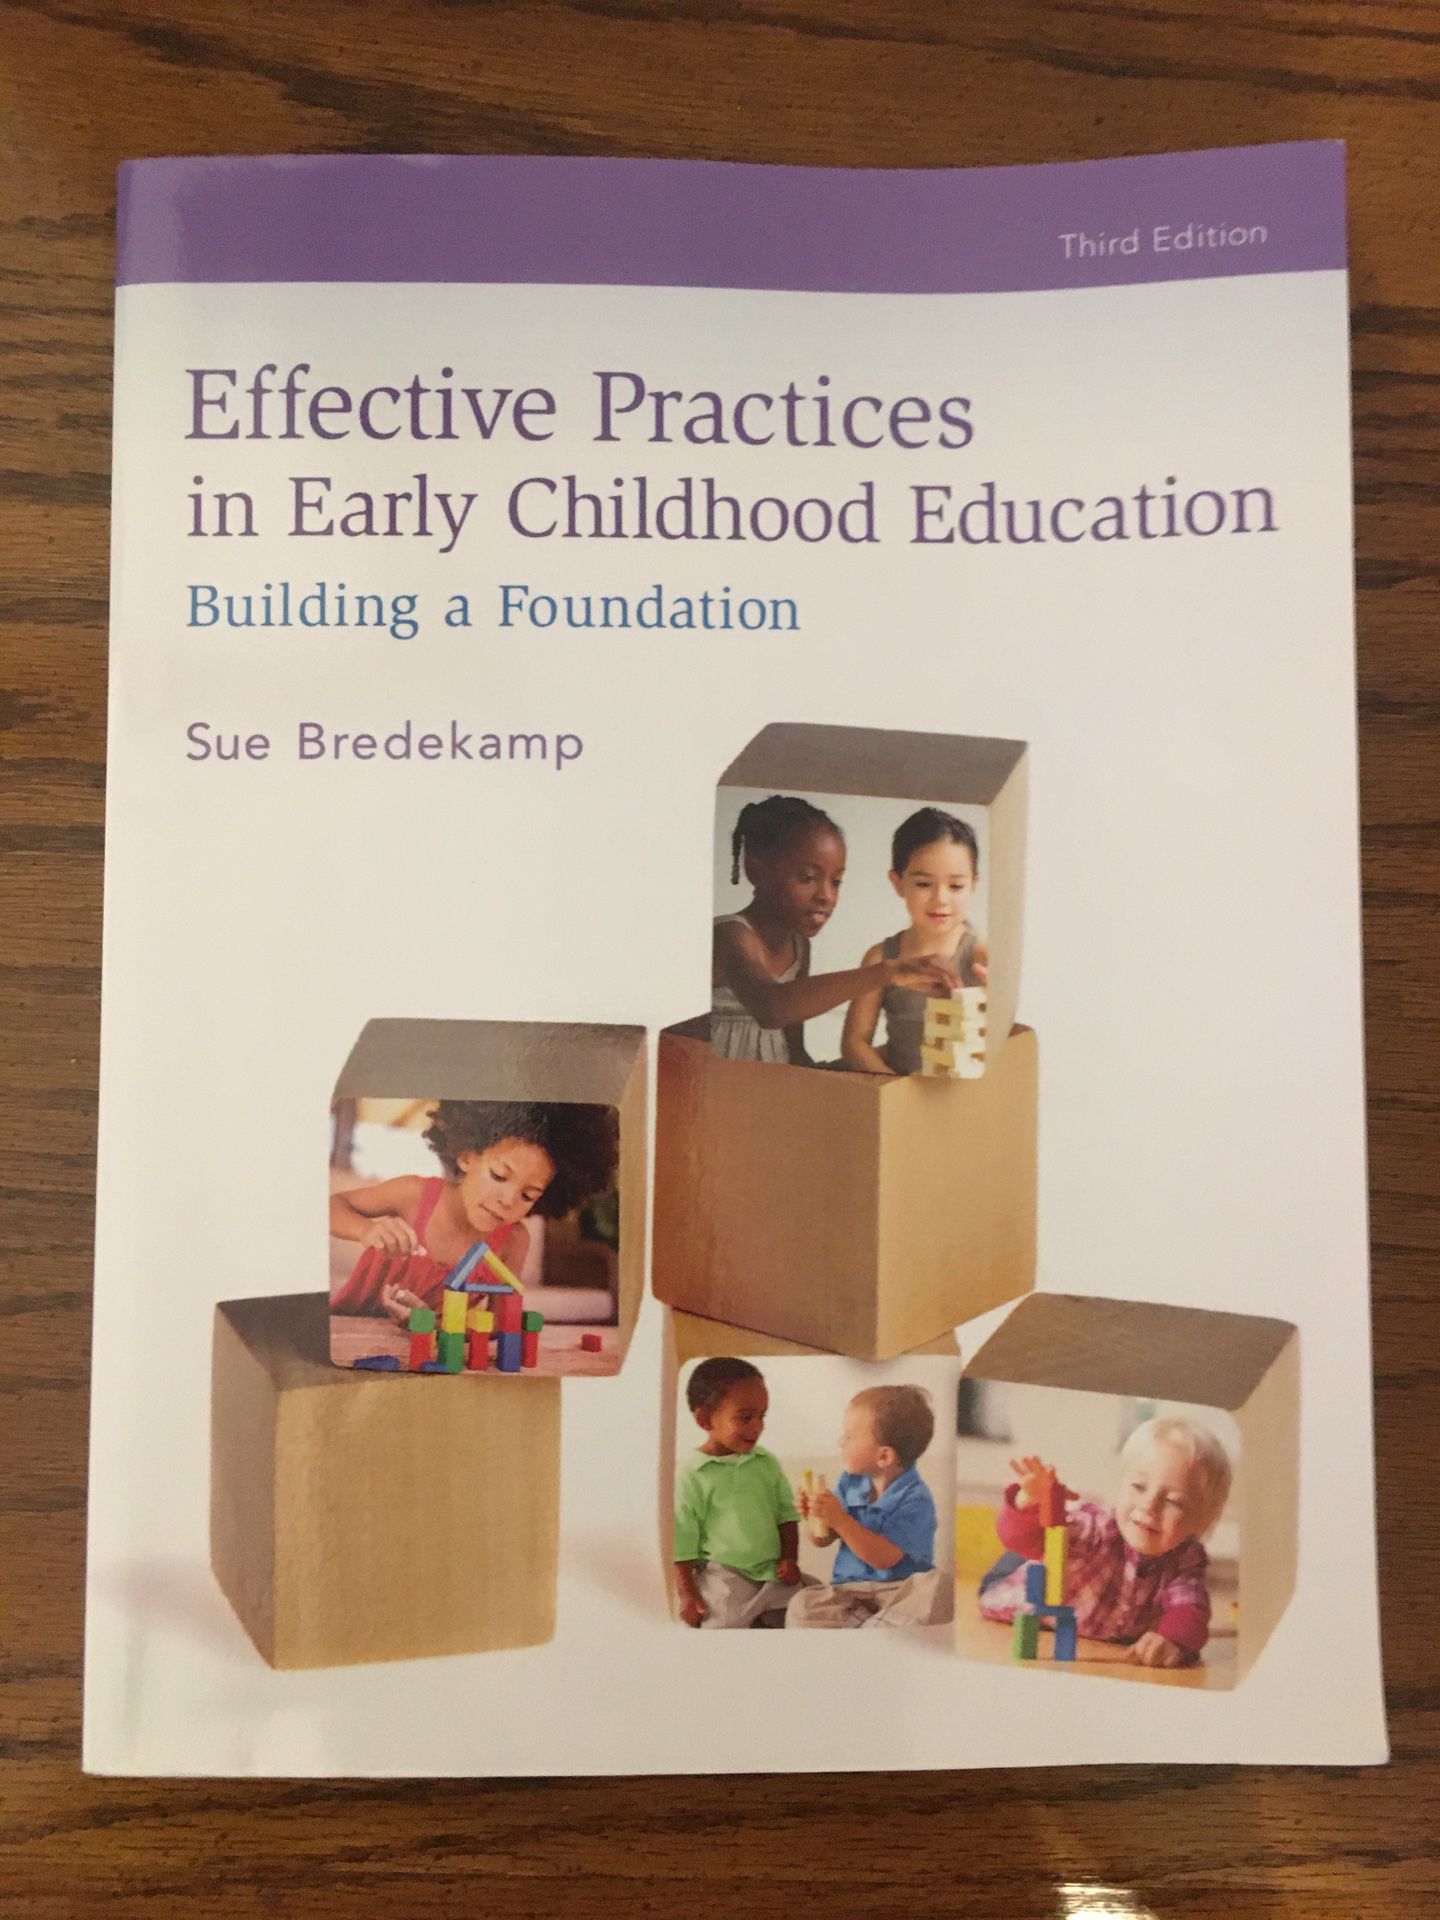 Effective practices in Early Childhood Education